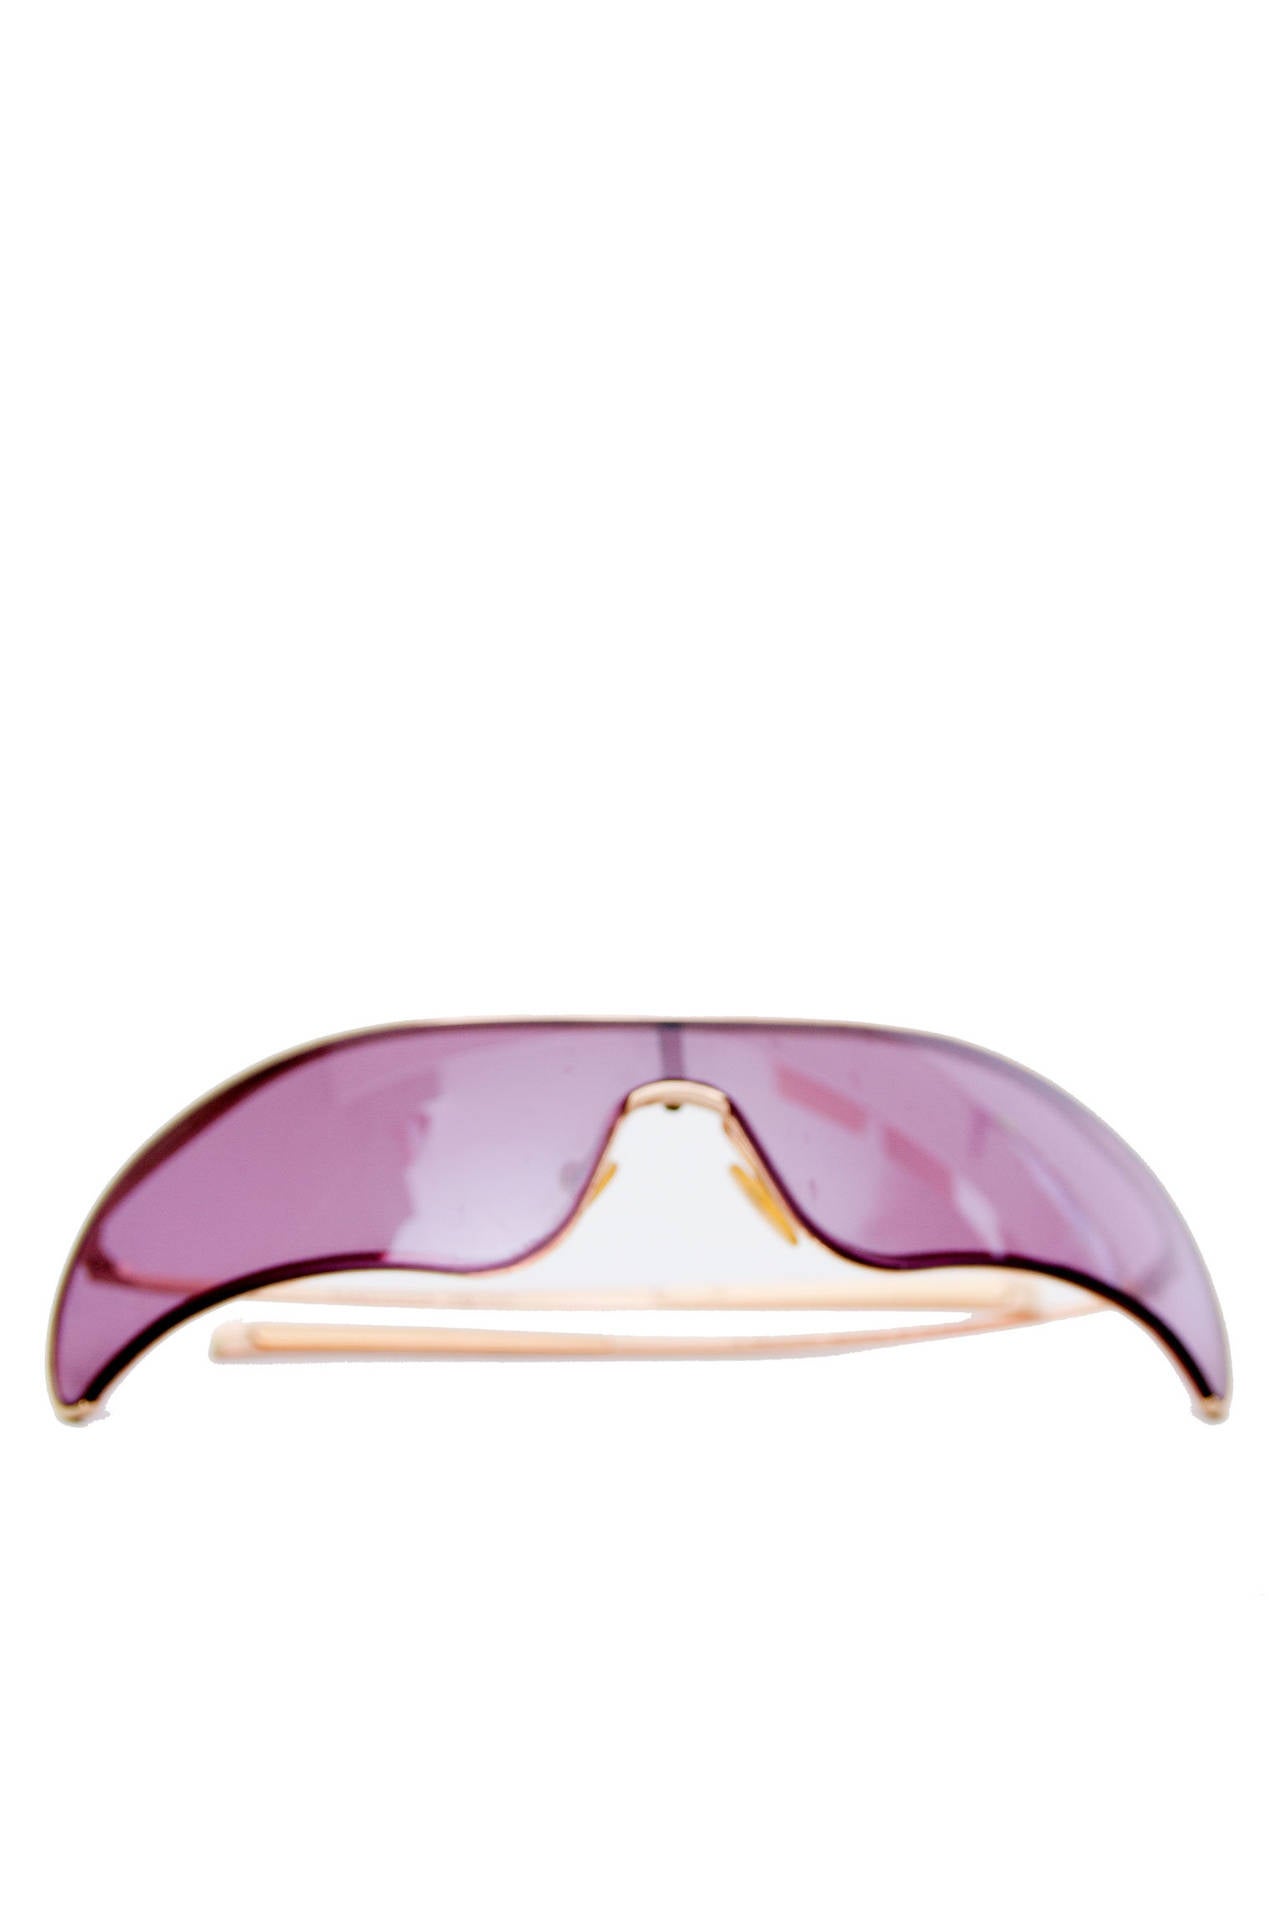 A pair of early 2000s Alexander McQueen sunglasses with a characteristic gold frame with rounded edges and purple glass. 

The glasses are stamped: Alexander McQueen on both the the inside and outside of the right arm.